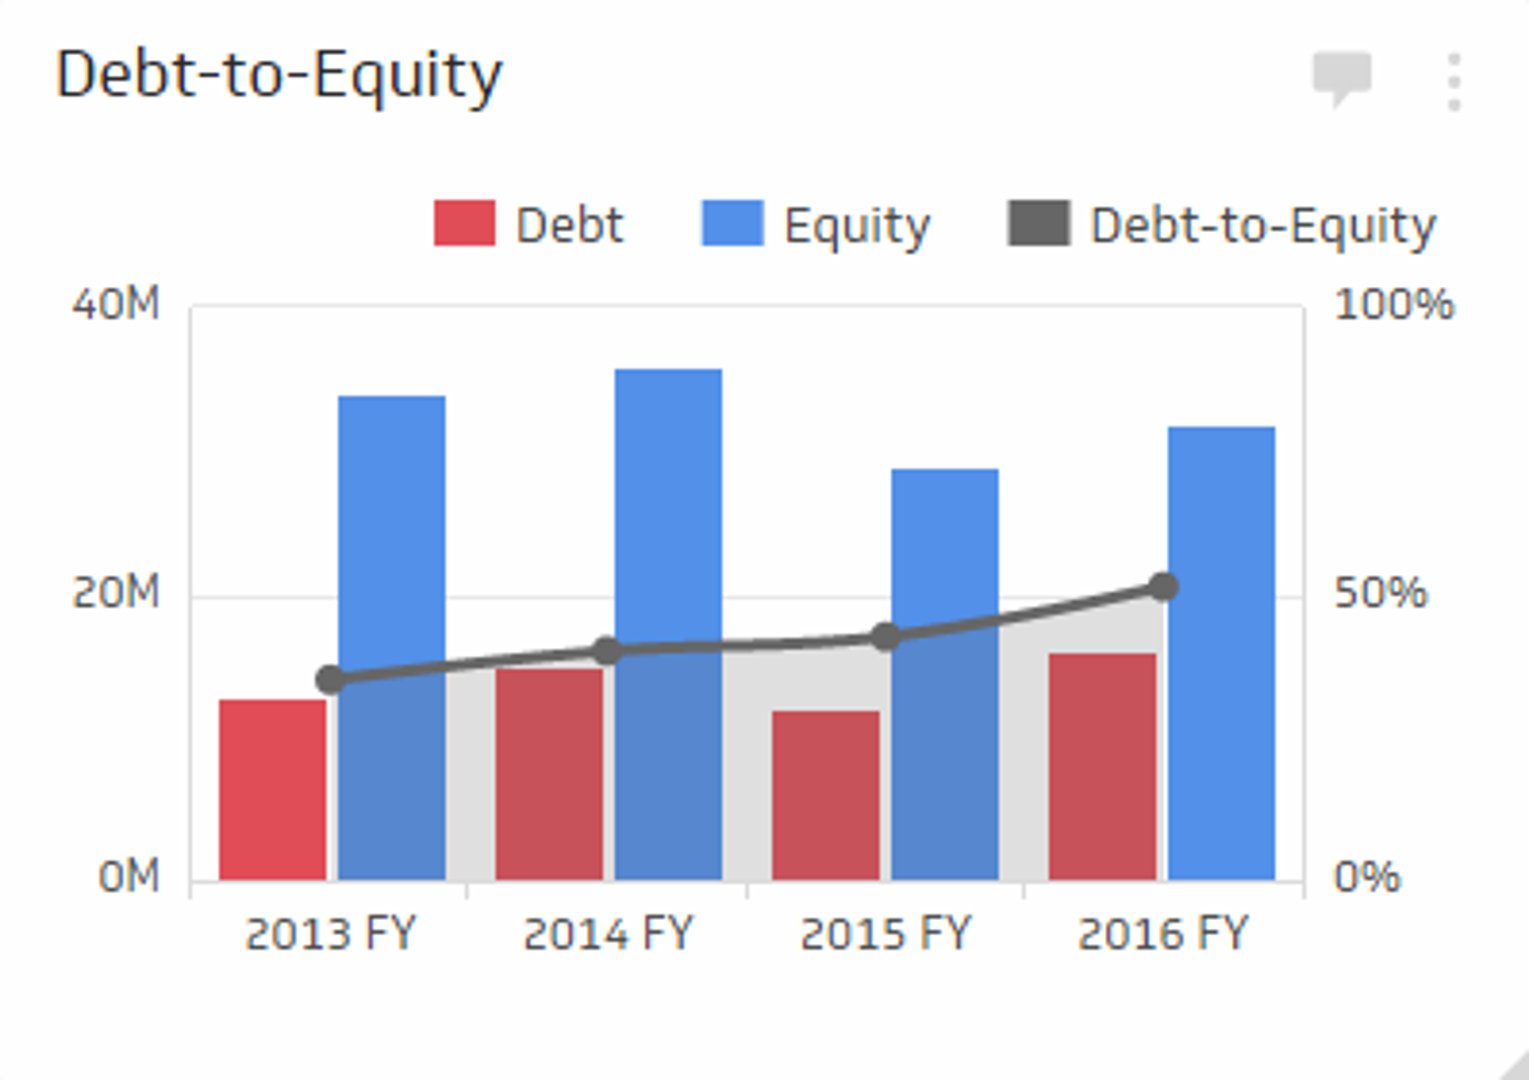 Related KPI Examples - Debt-to-Equity Ratio Metric